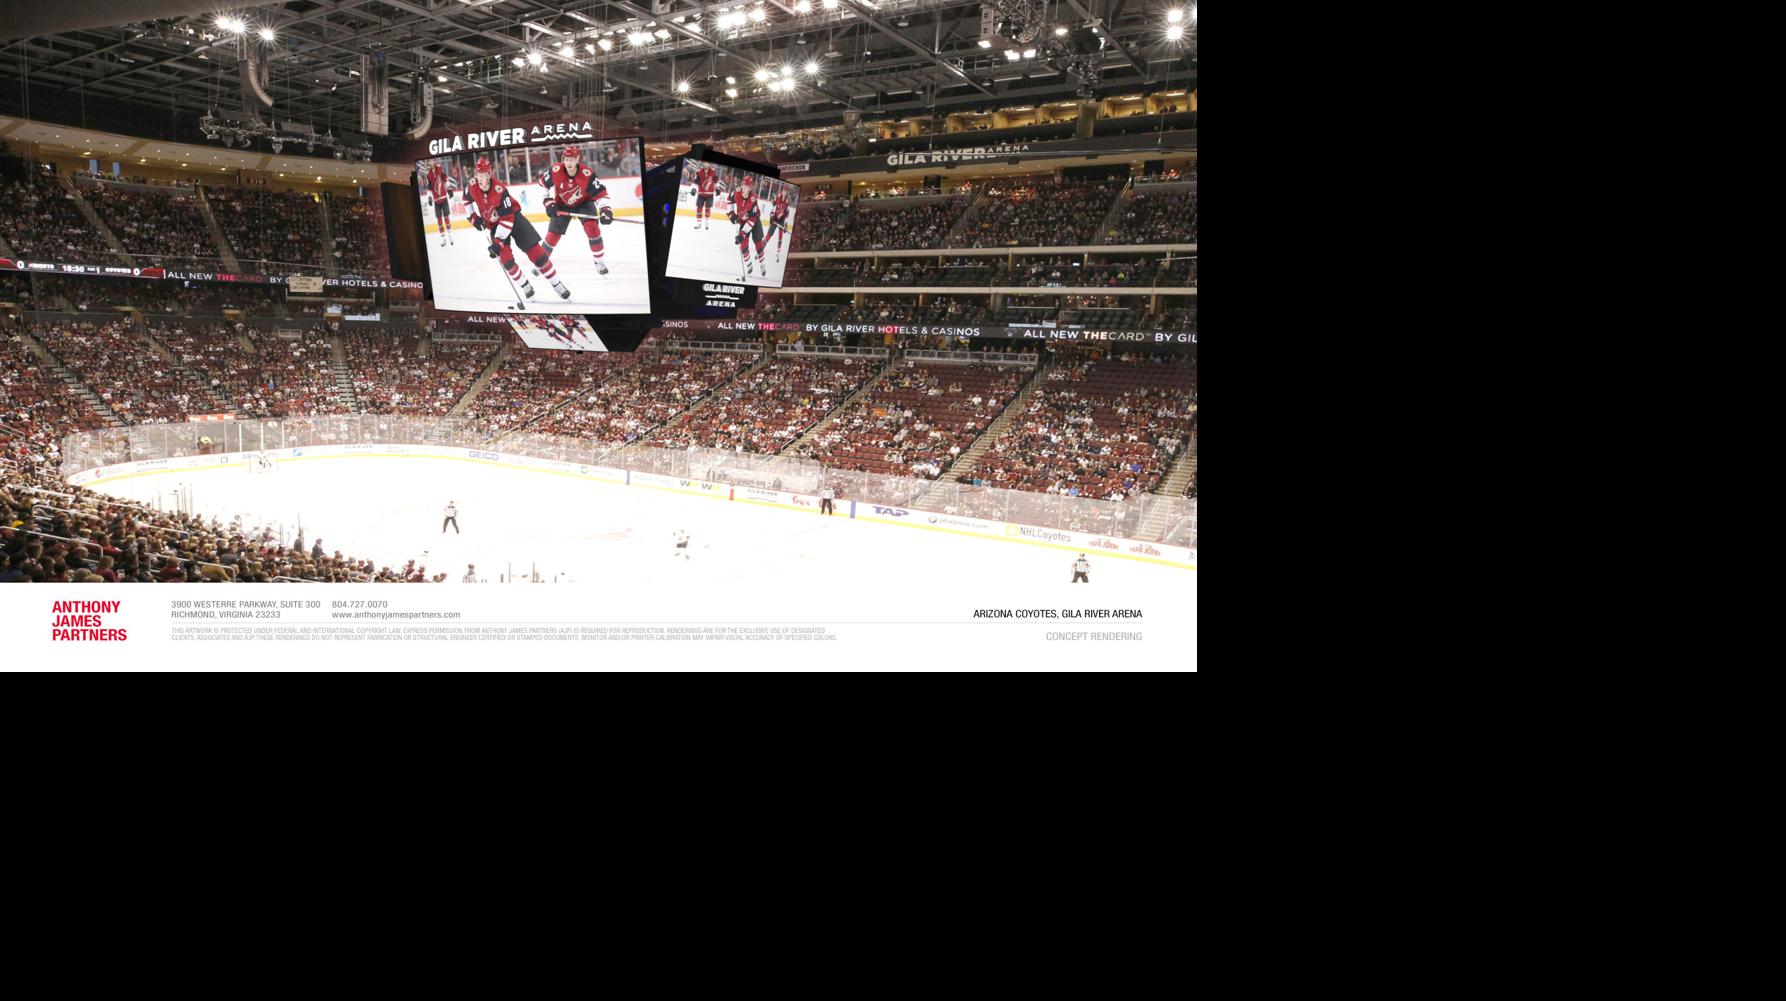 Gila River Arena to install HD videoboard by Coyotes' home opener